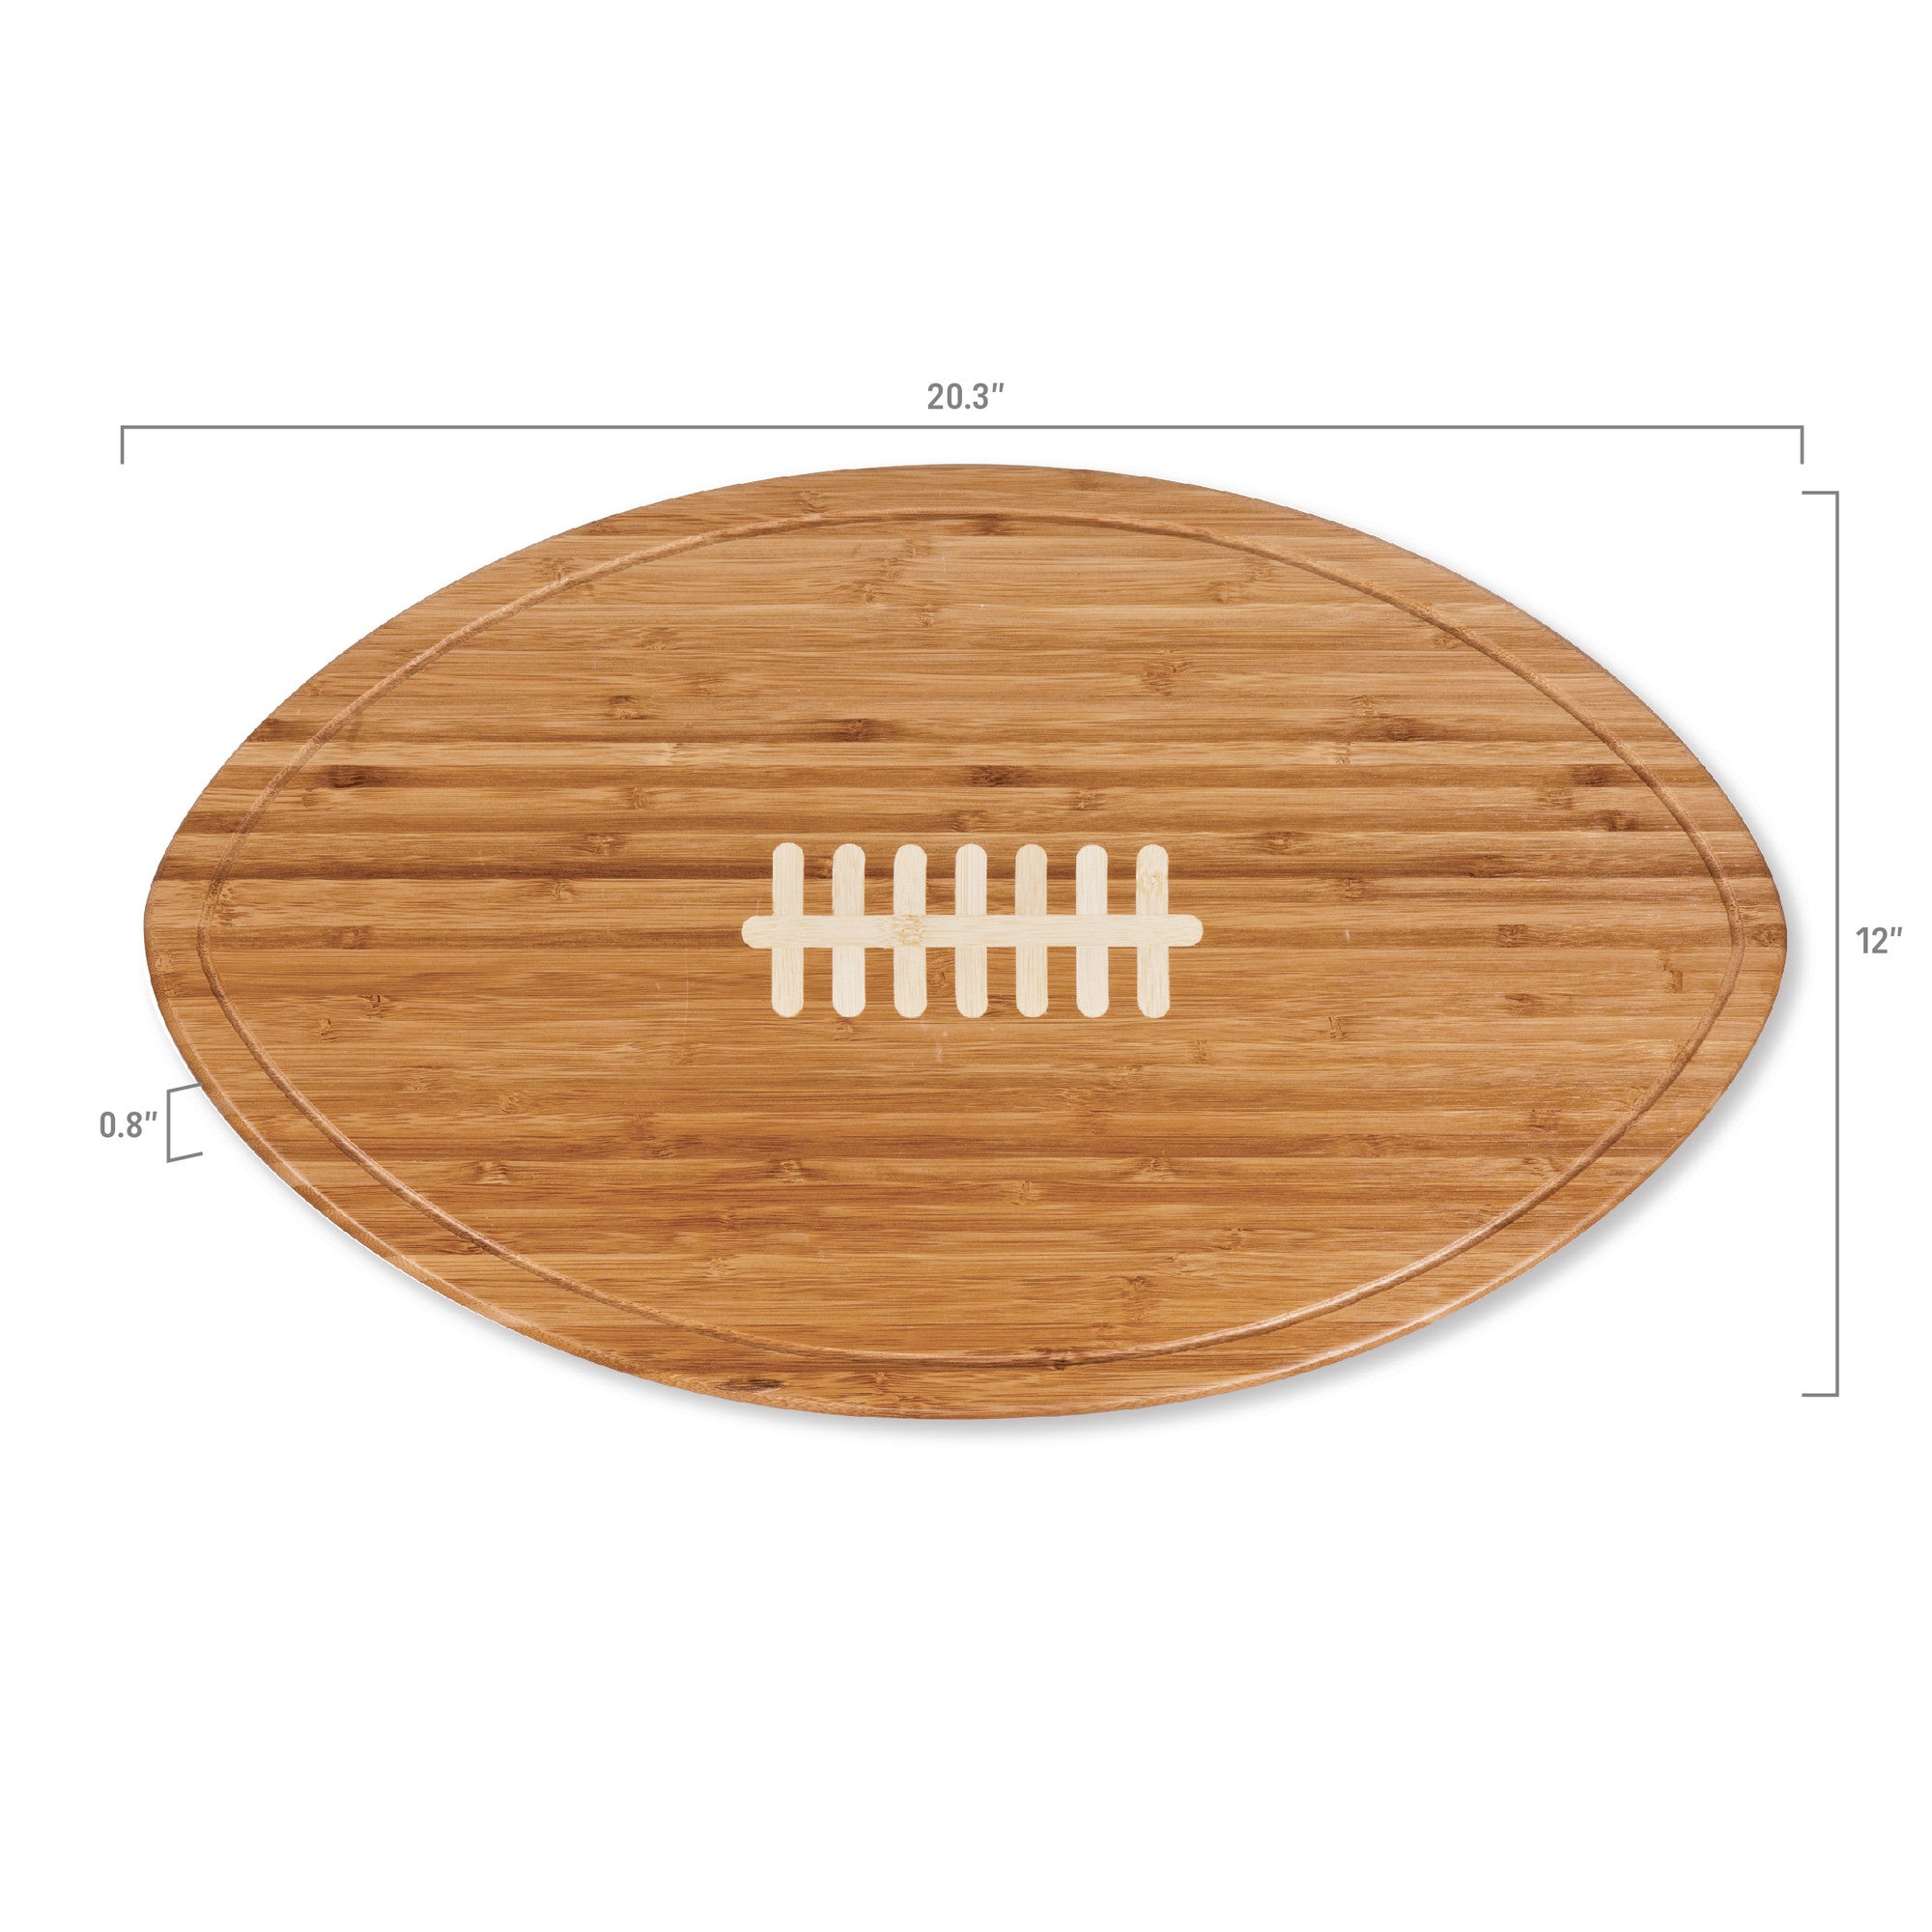 Boise State Broncos - Kickoff Football Cutting Board & Serving Tray